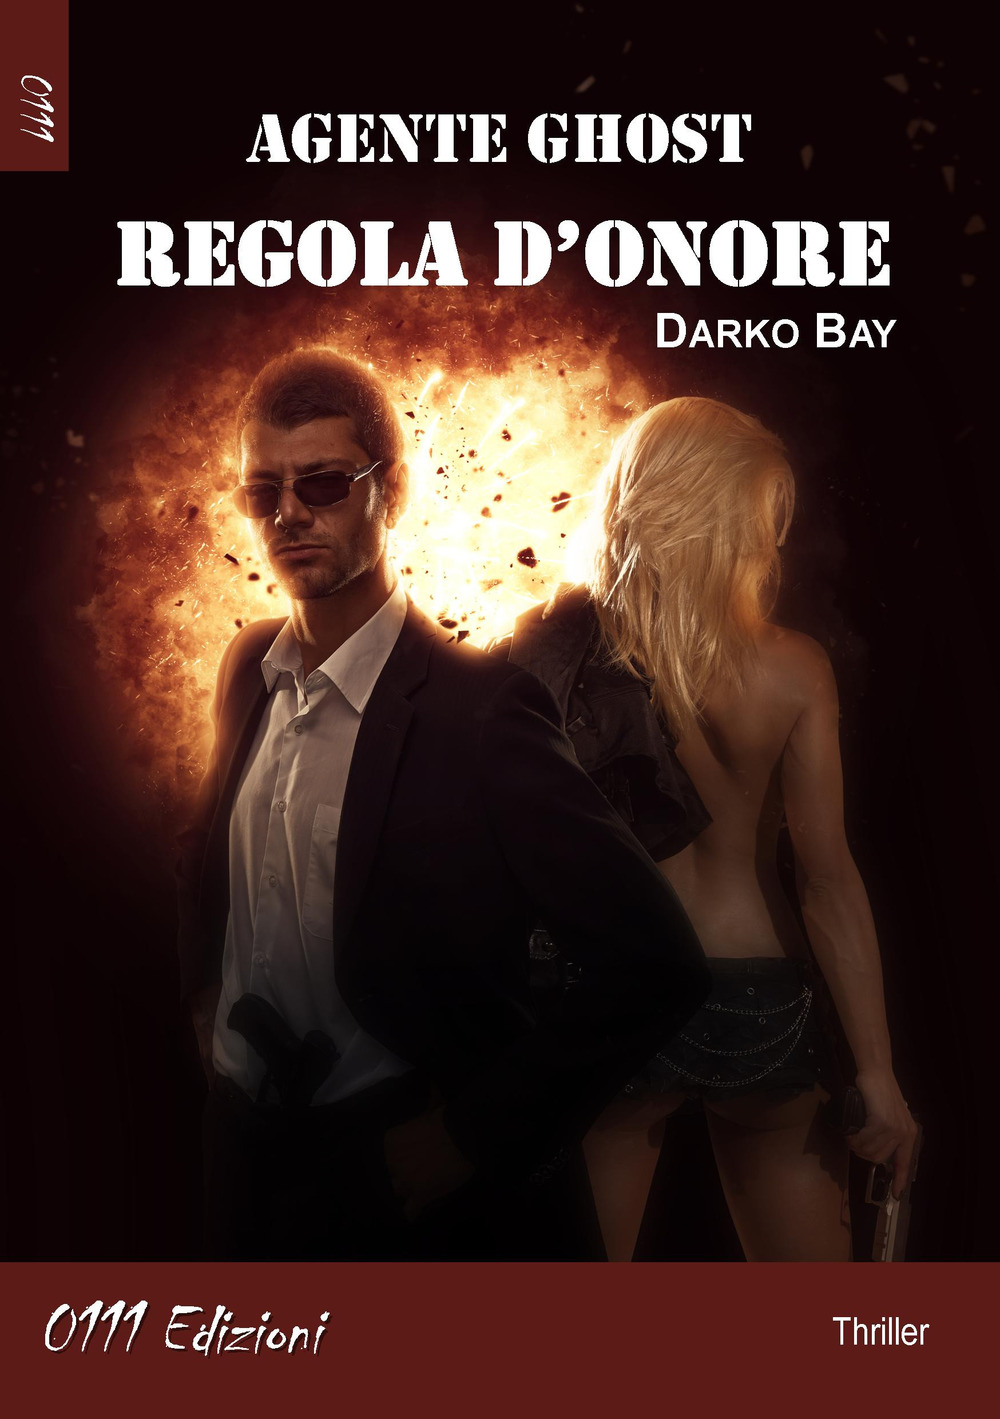 Regola d'onore. Agente Ghost